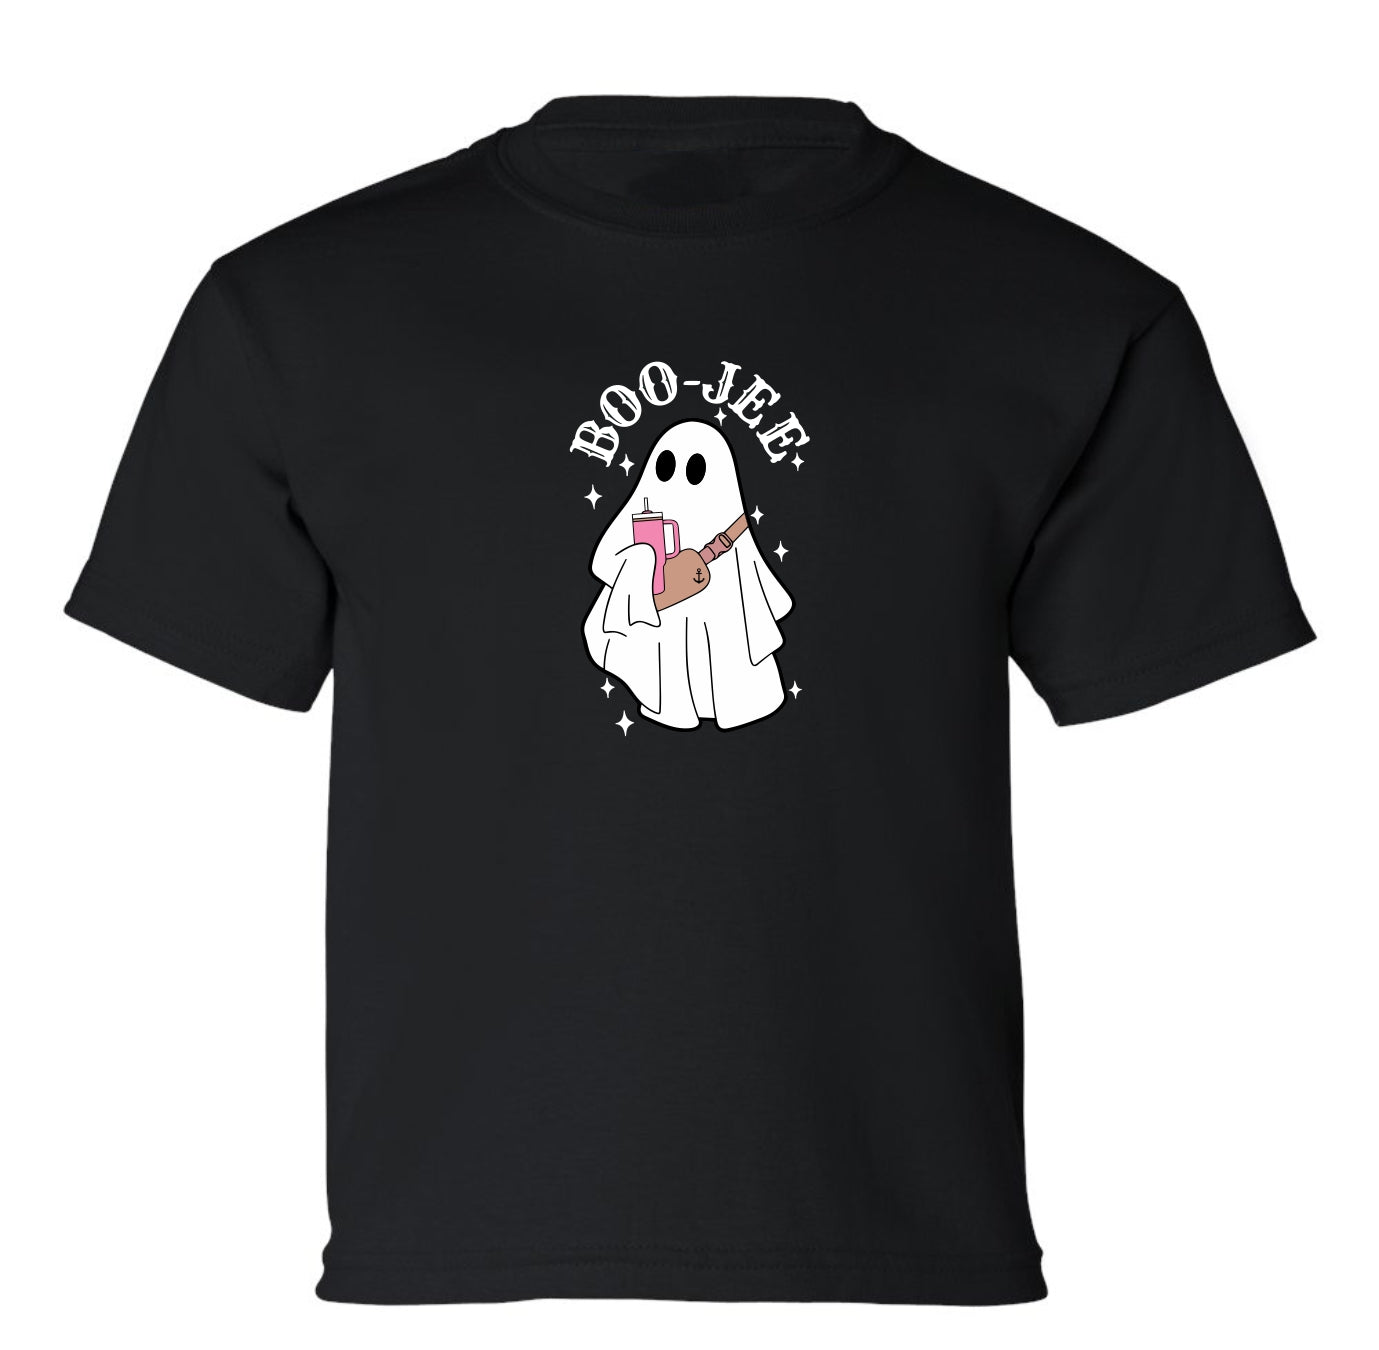 "Boo-Jee" Toddler/Youth T-Shirt